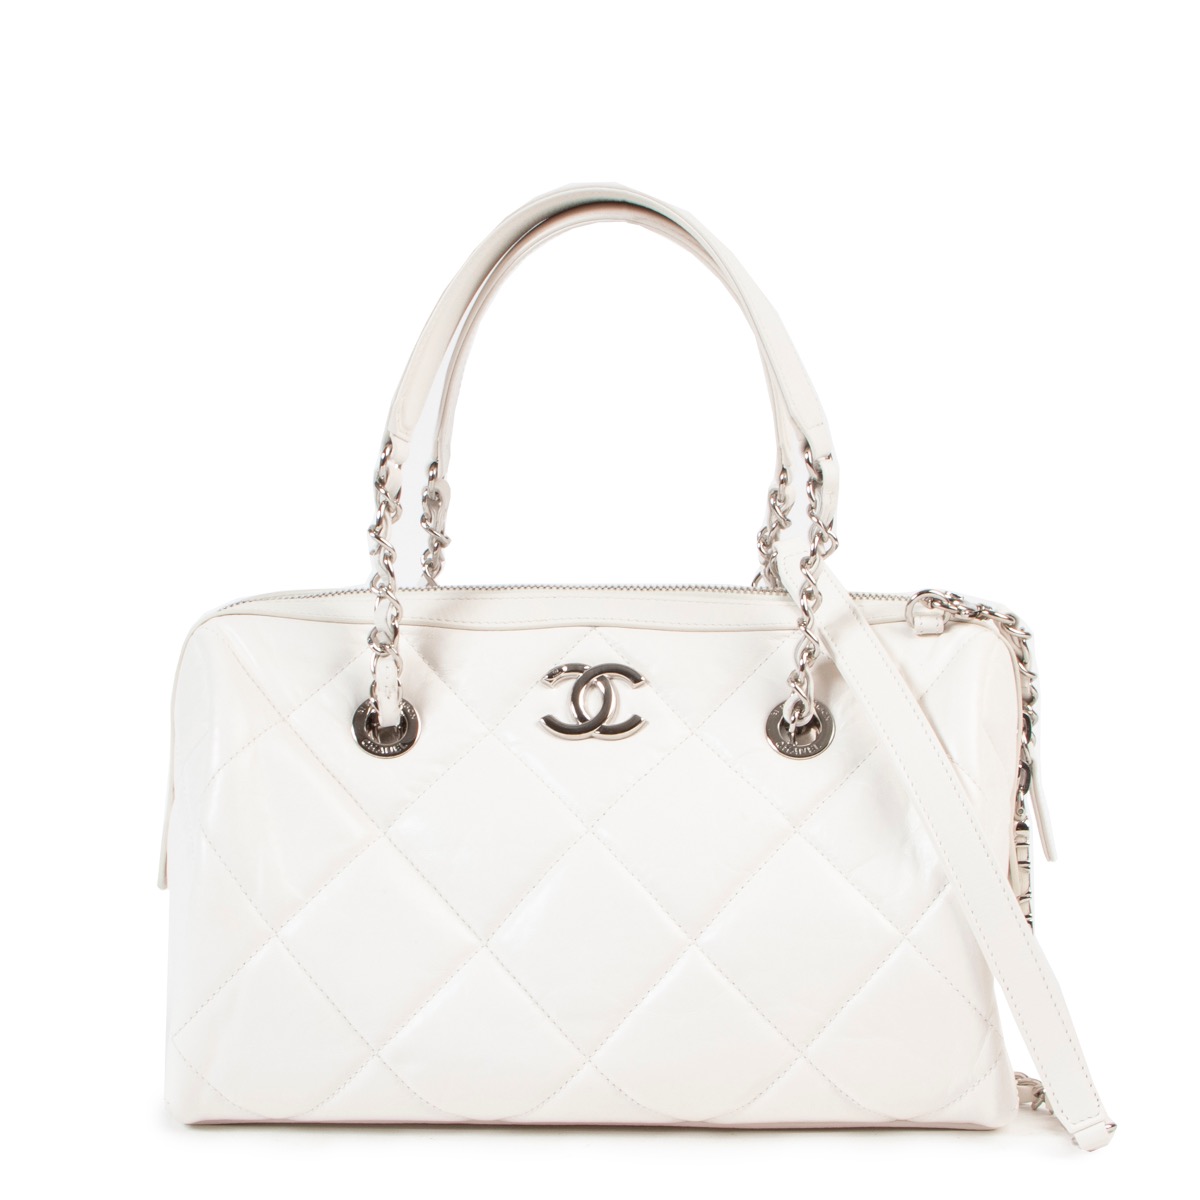 Chanel Boston Bag  Prestige Online Store  Luxury Items with Exceptional  Savings from the eShop